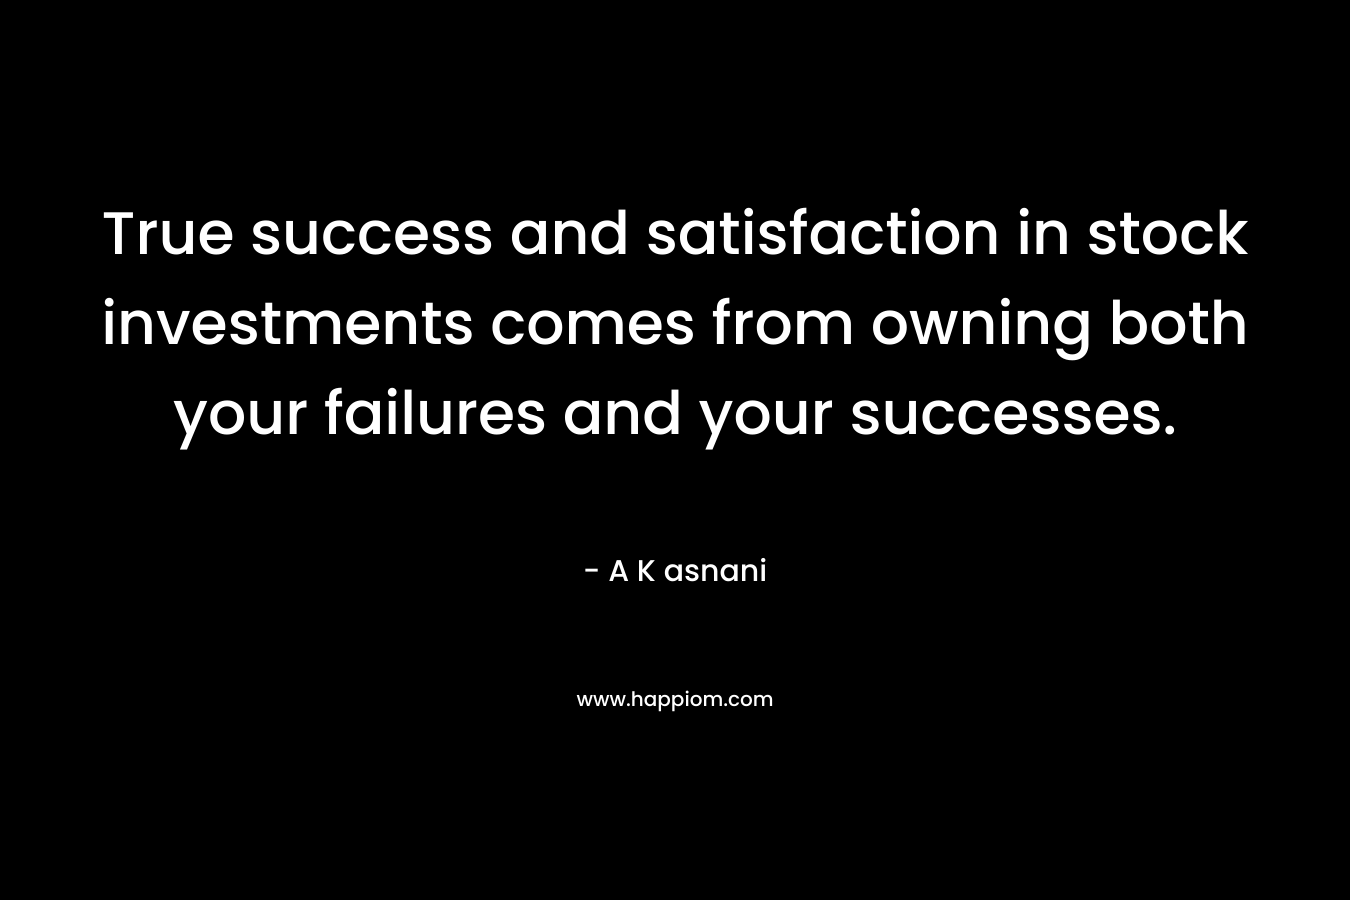 True success and satisfaction in stock investments comes from owning both your failures and your successes. – A K asnani